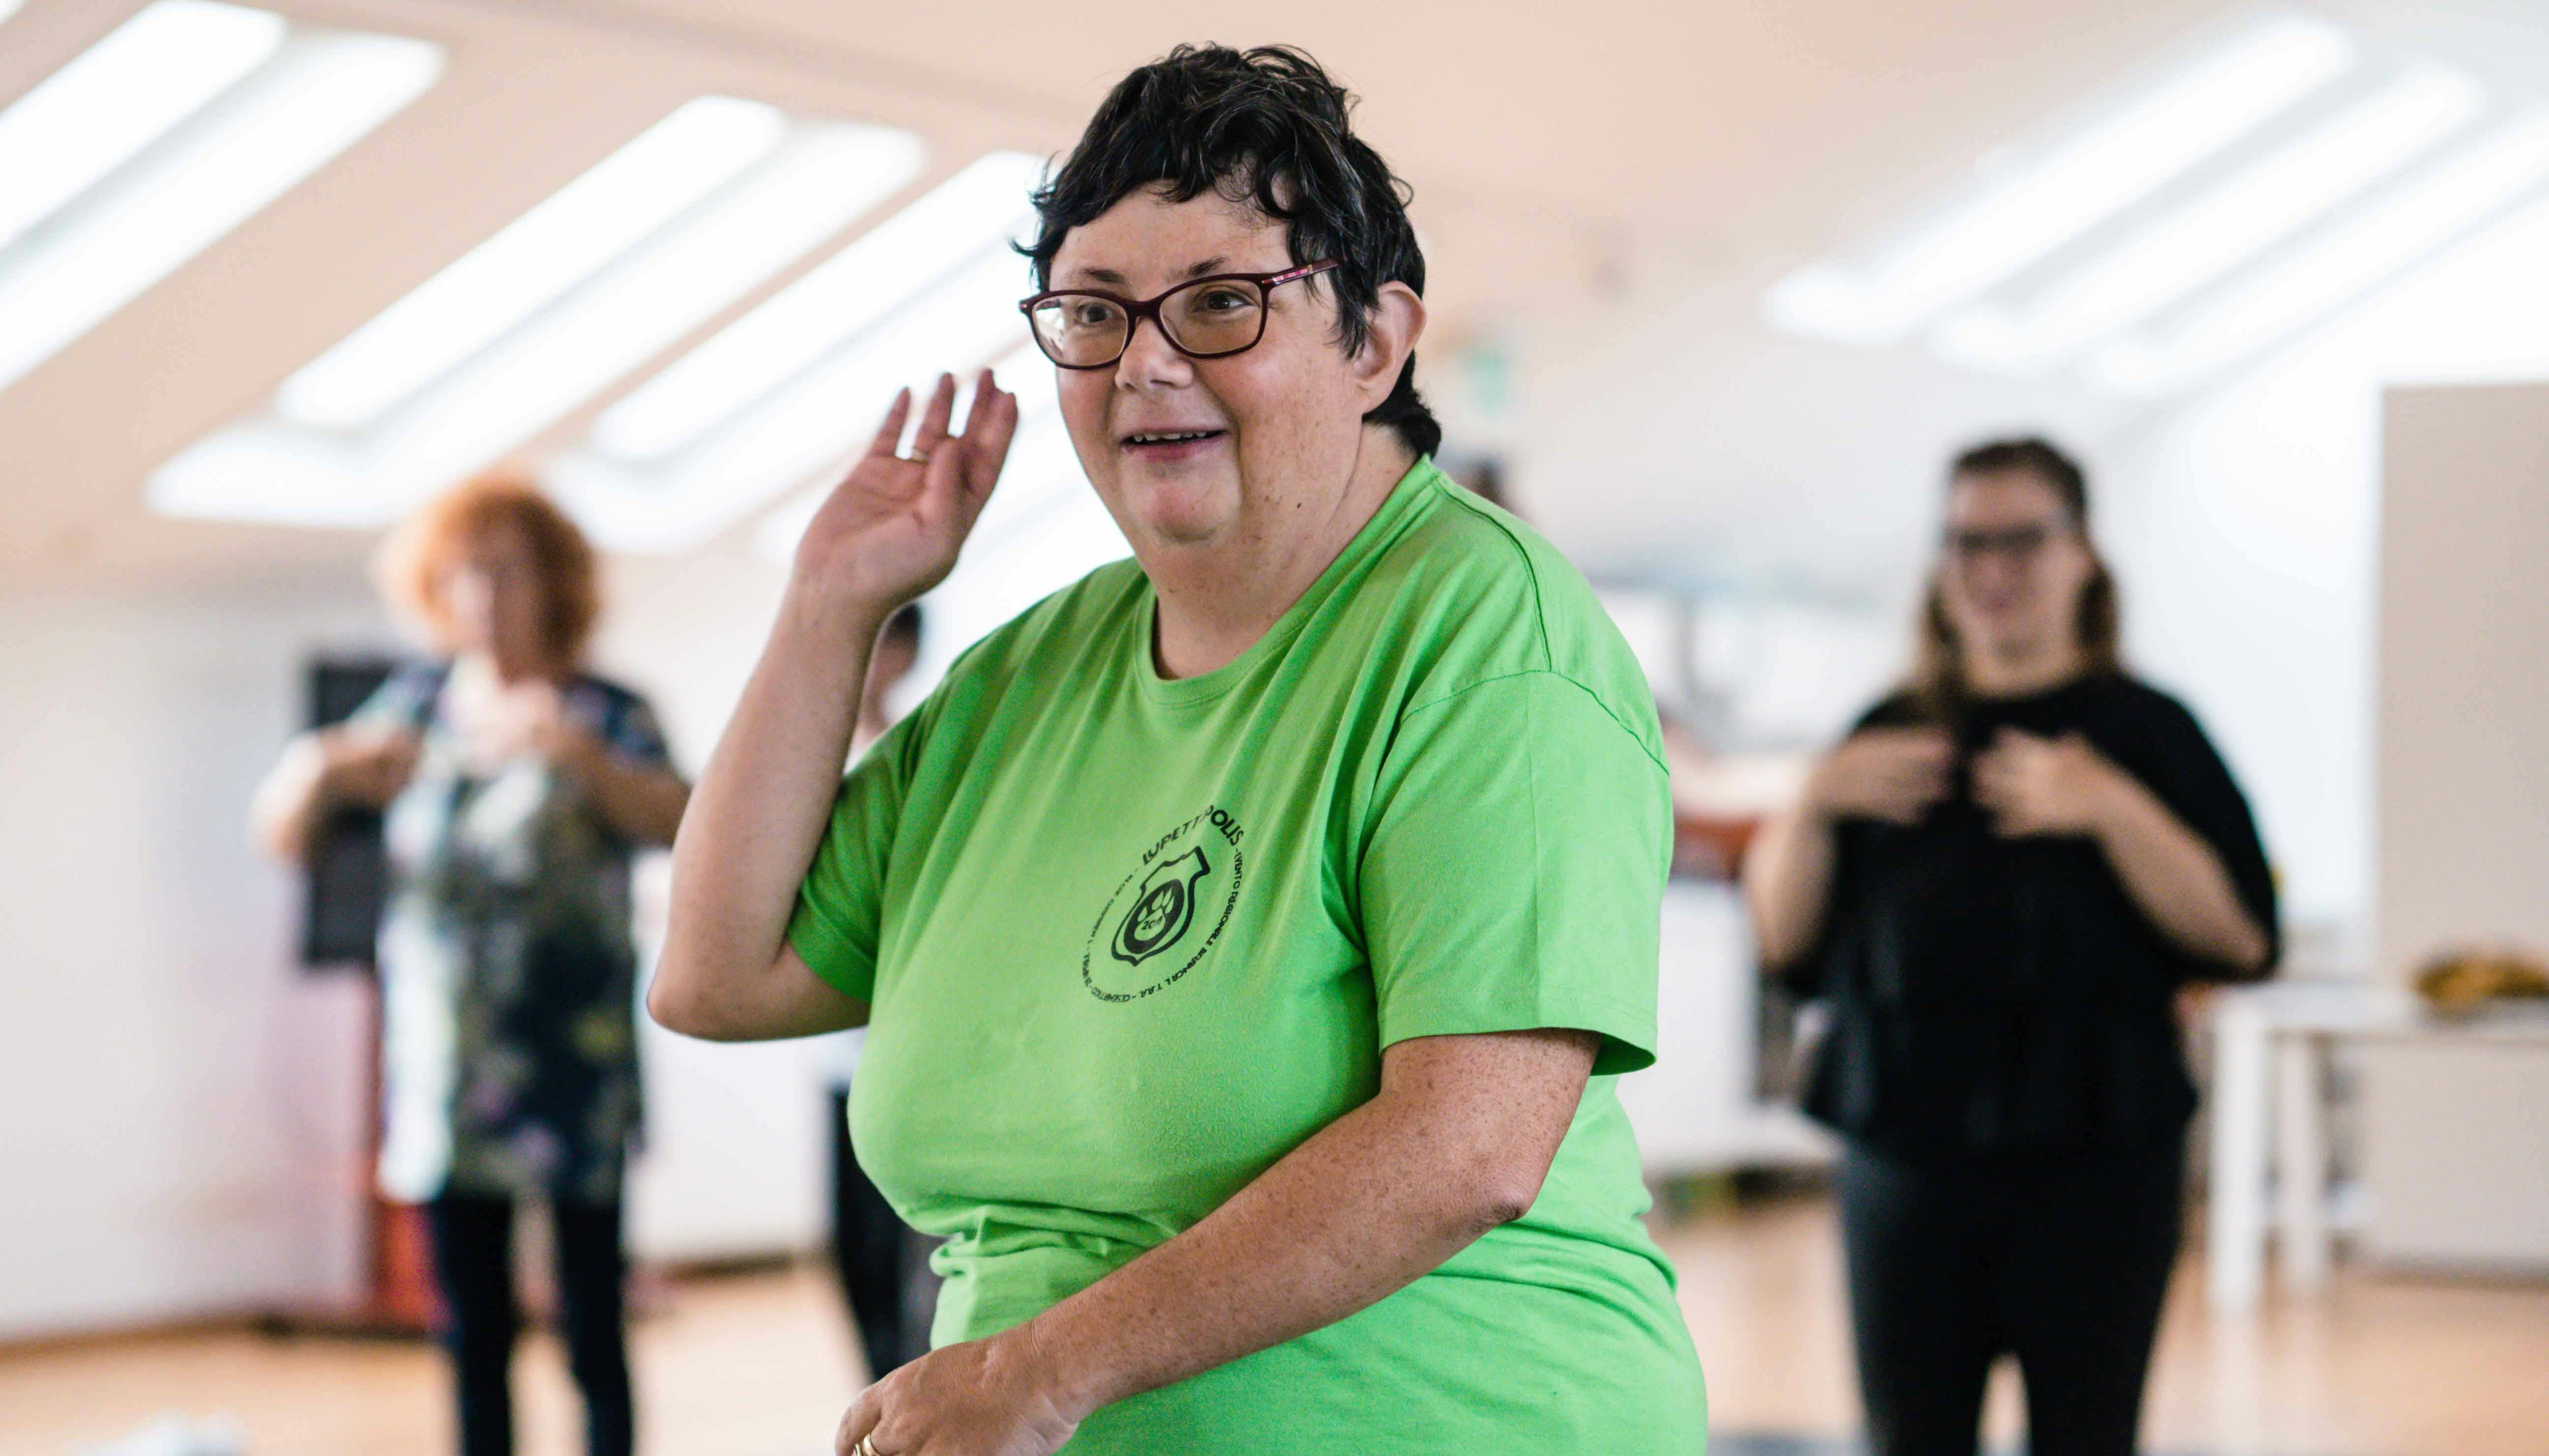 A participant in the session wears a green T-shirt and stretches her arm upwards